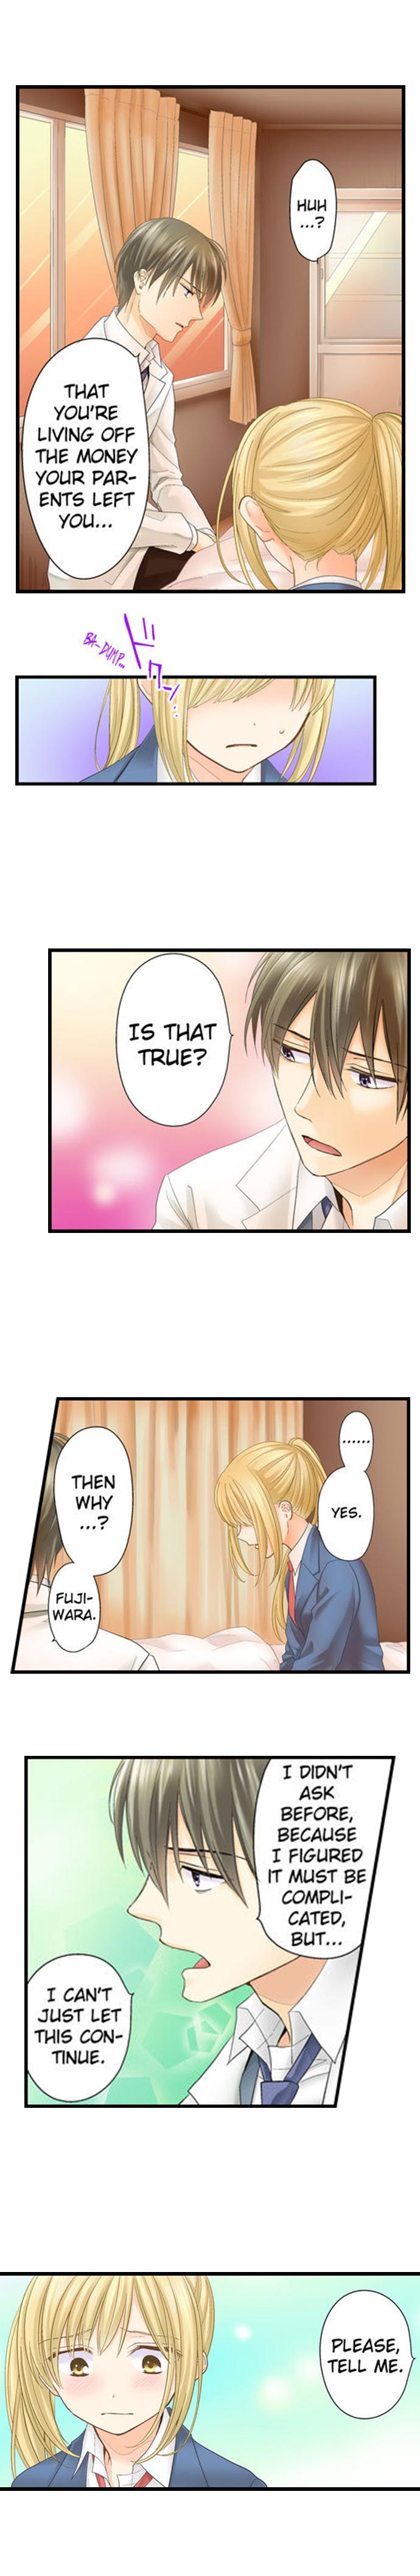 Running a Love Hotel with My Math Teacher - Chapter 8 Page 3